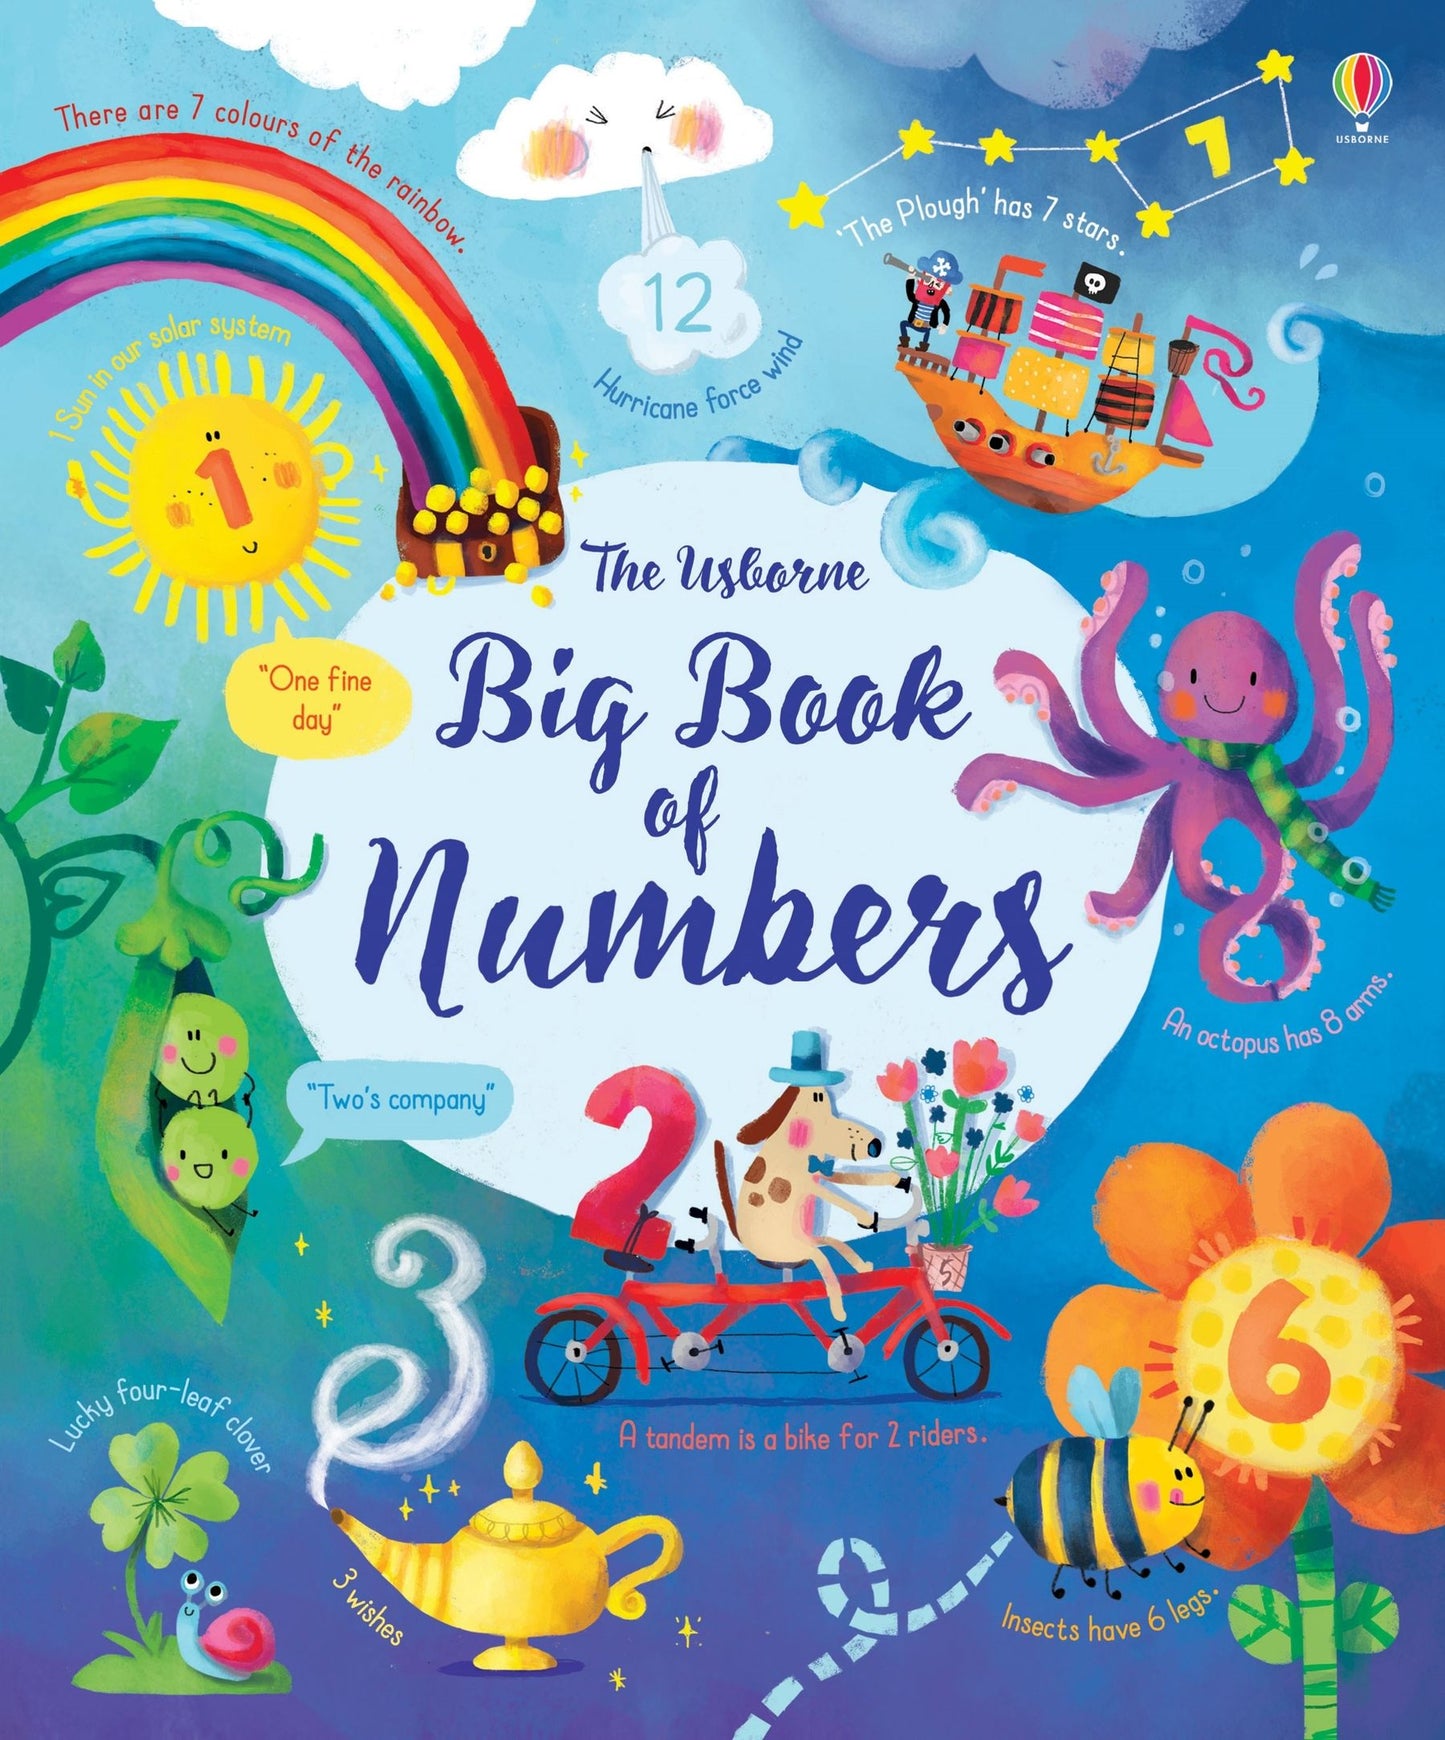 The Big Book of Numbers